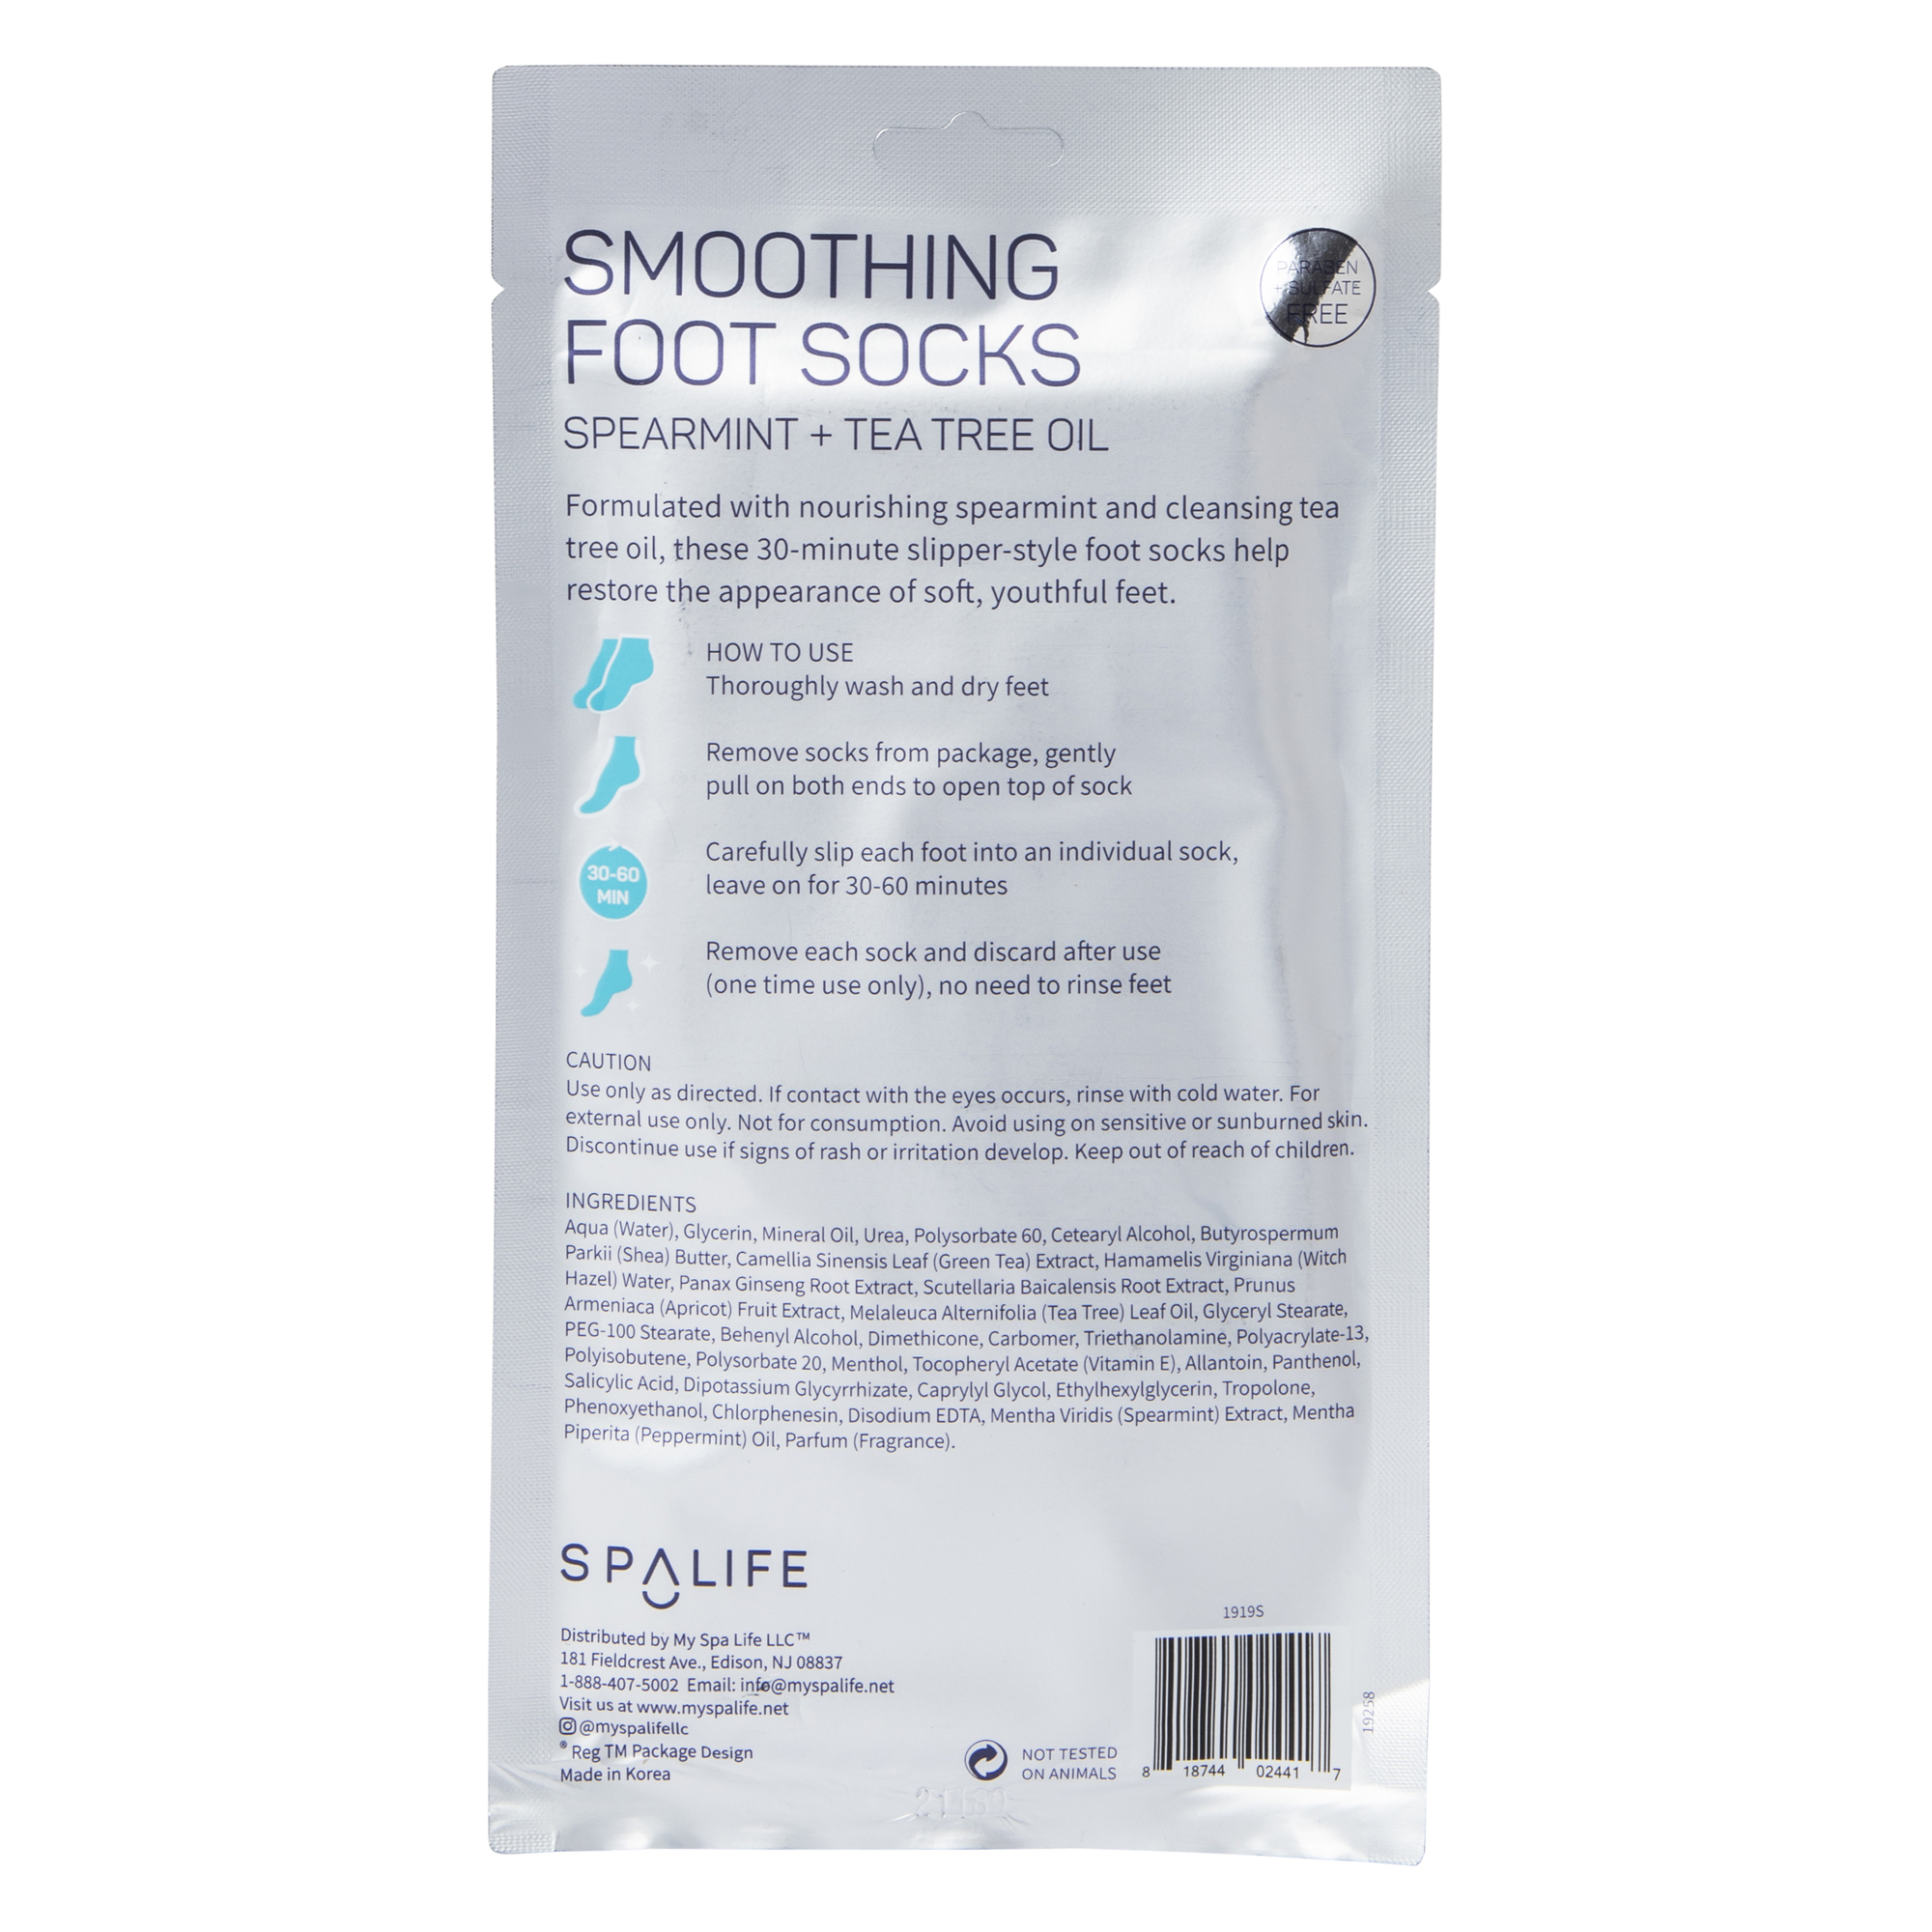 spa life™ smoothing foot socks with spearmint + tea tree oil